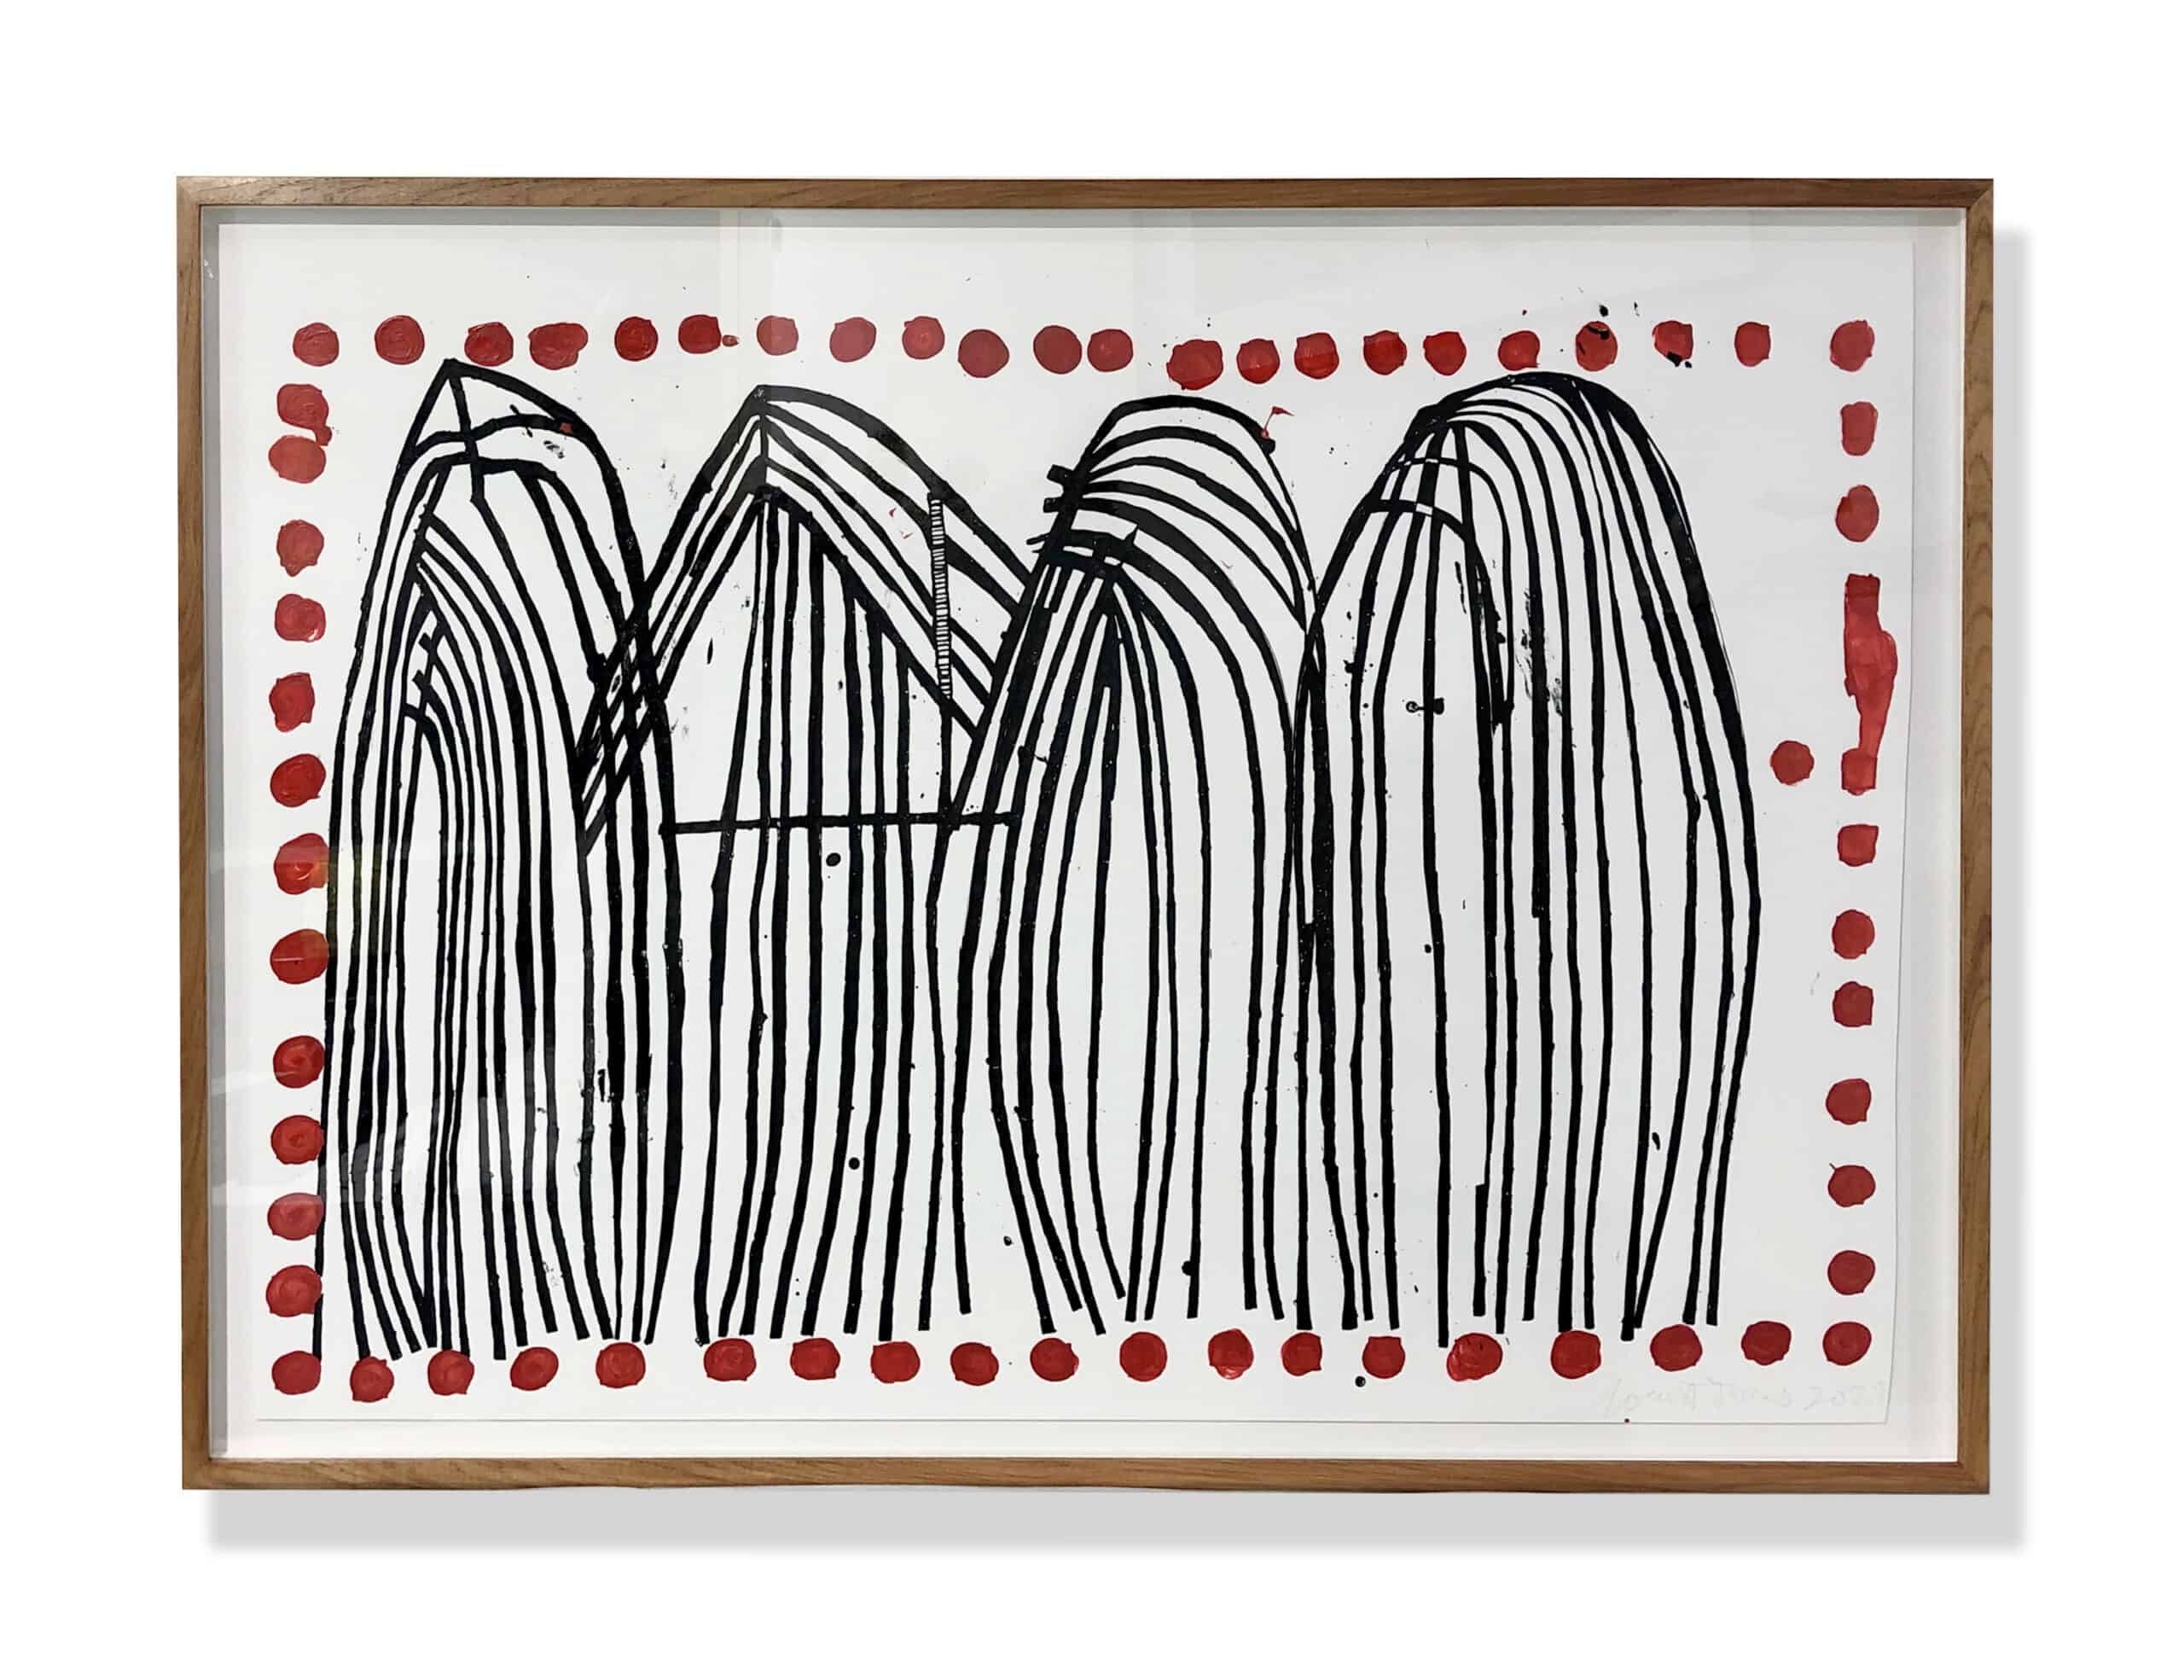 ‘Four Sacred Mountains’, 2021, ink on paper, framed, ca. 166 x 117 cm